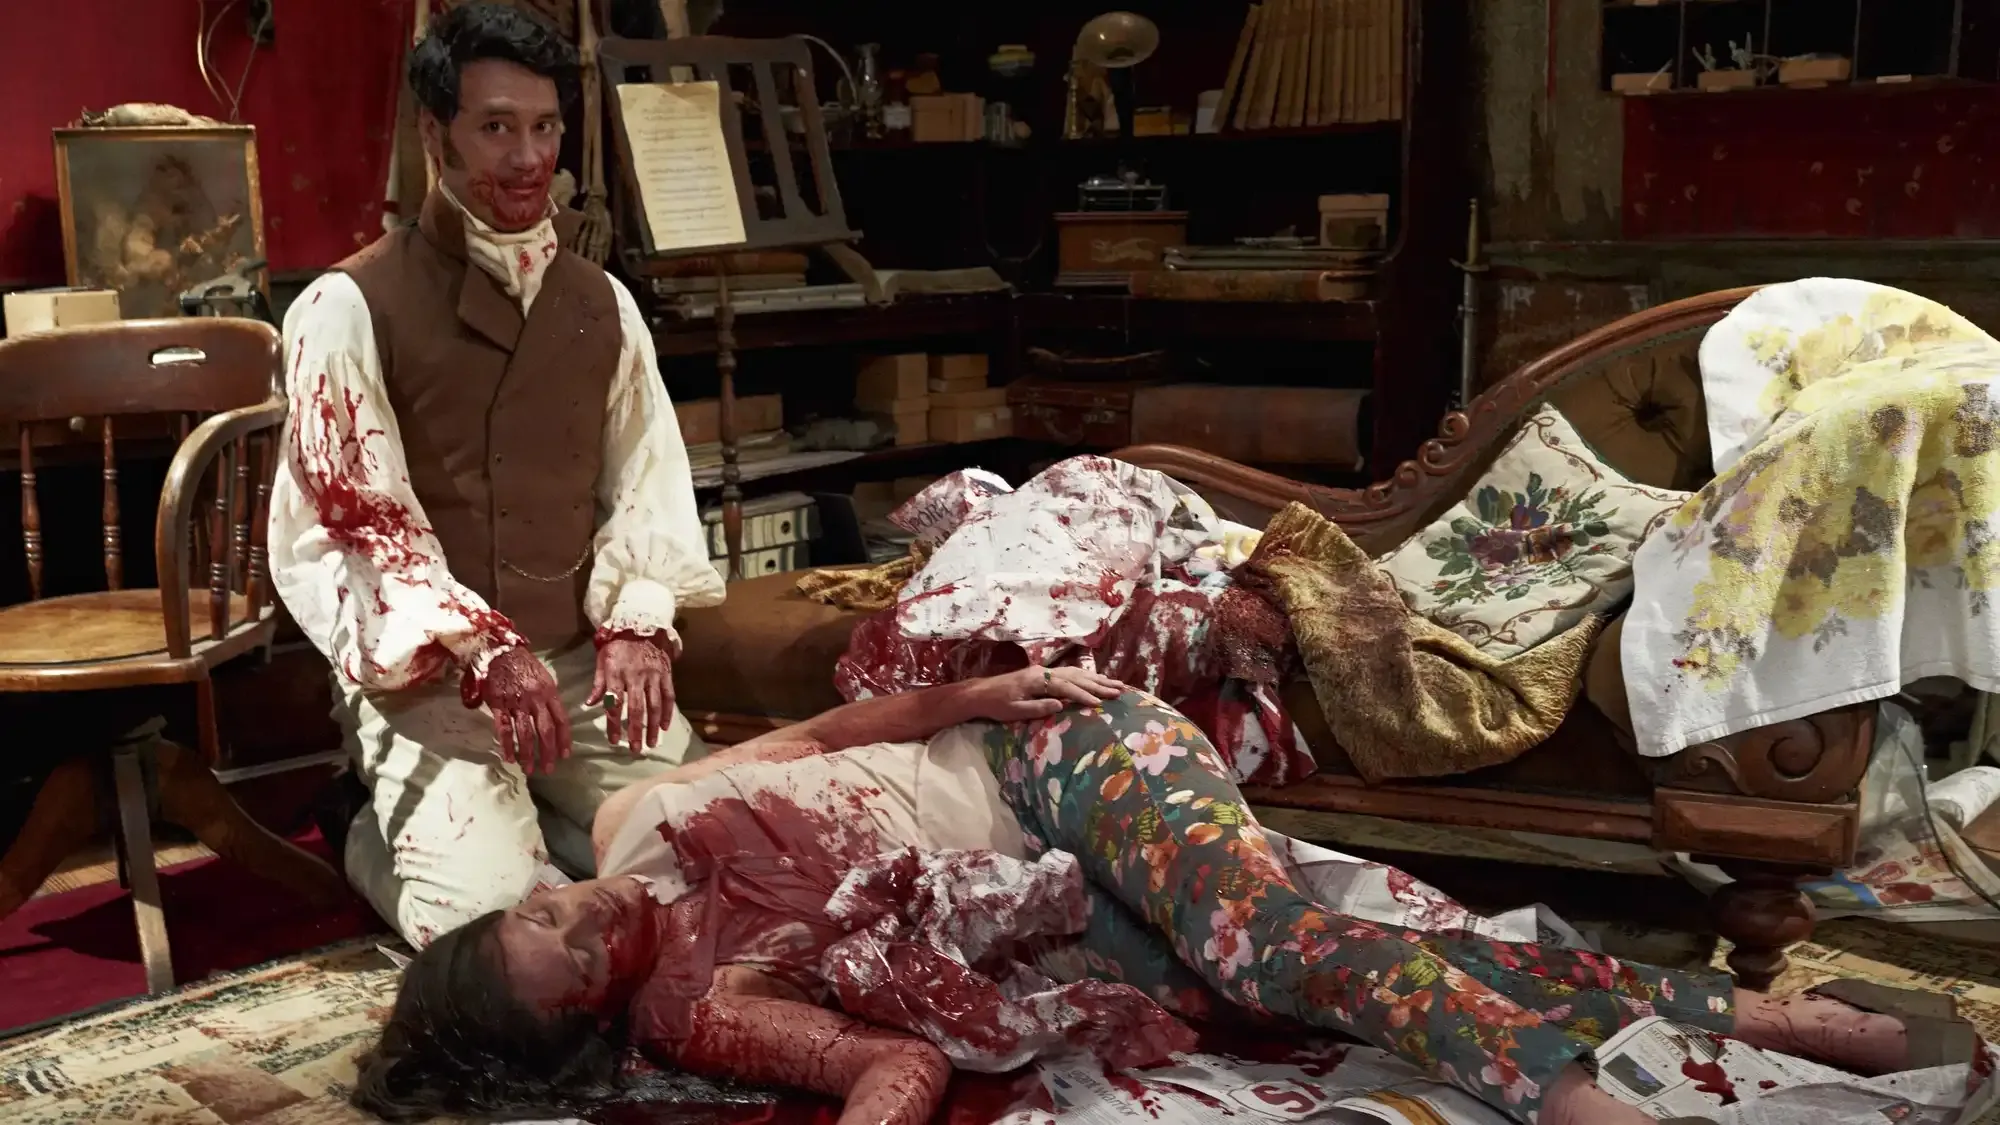 What We Do in the Shadows movie review